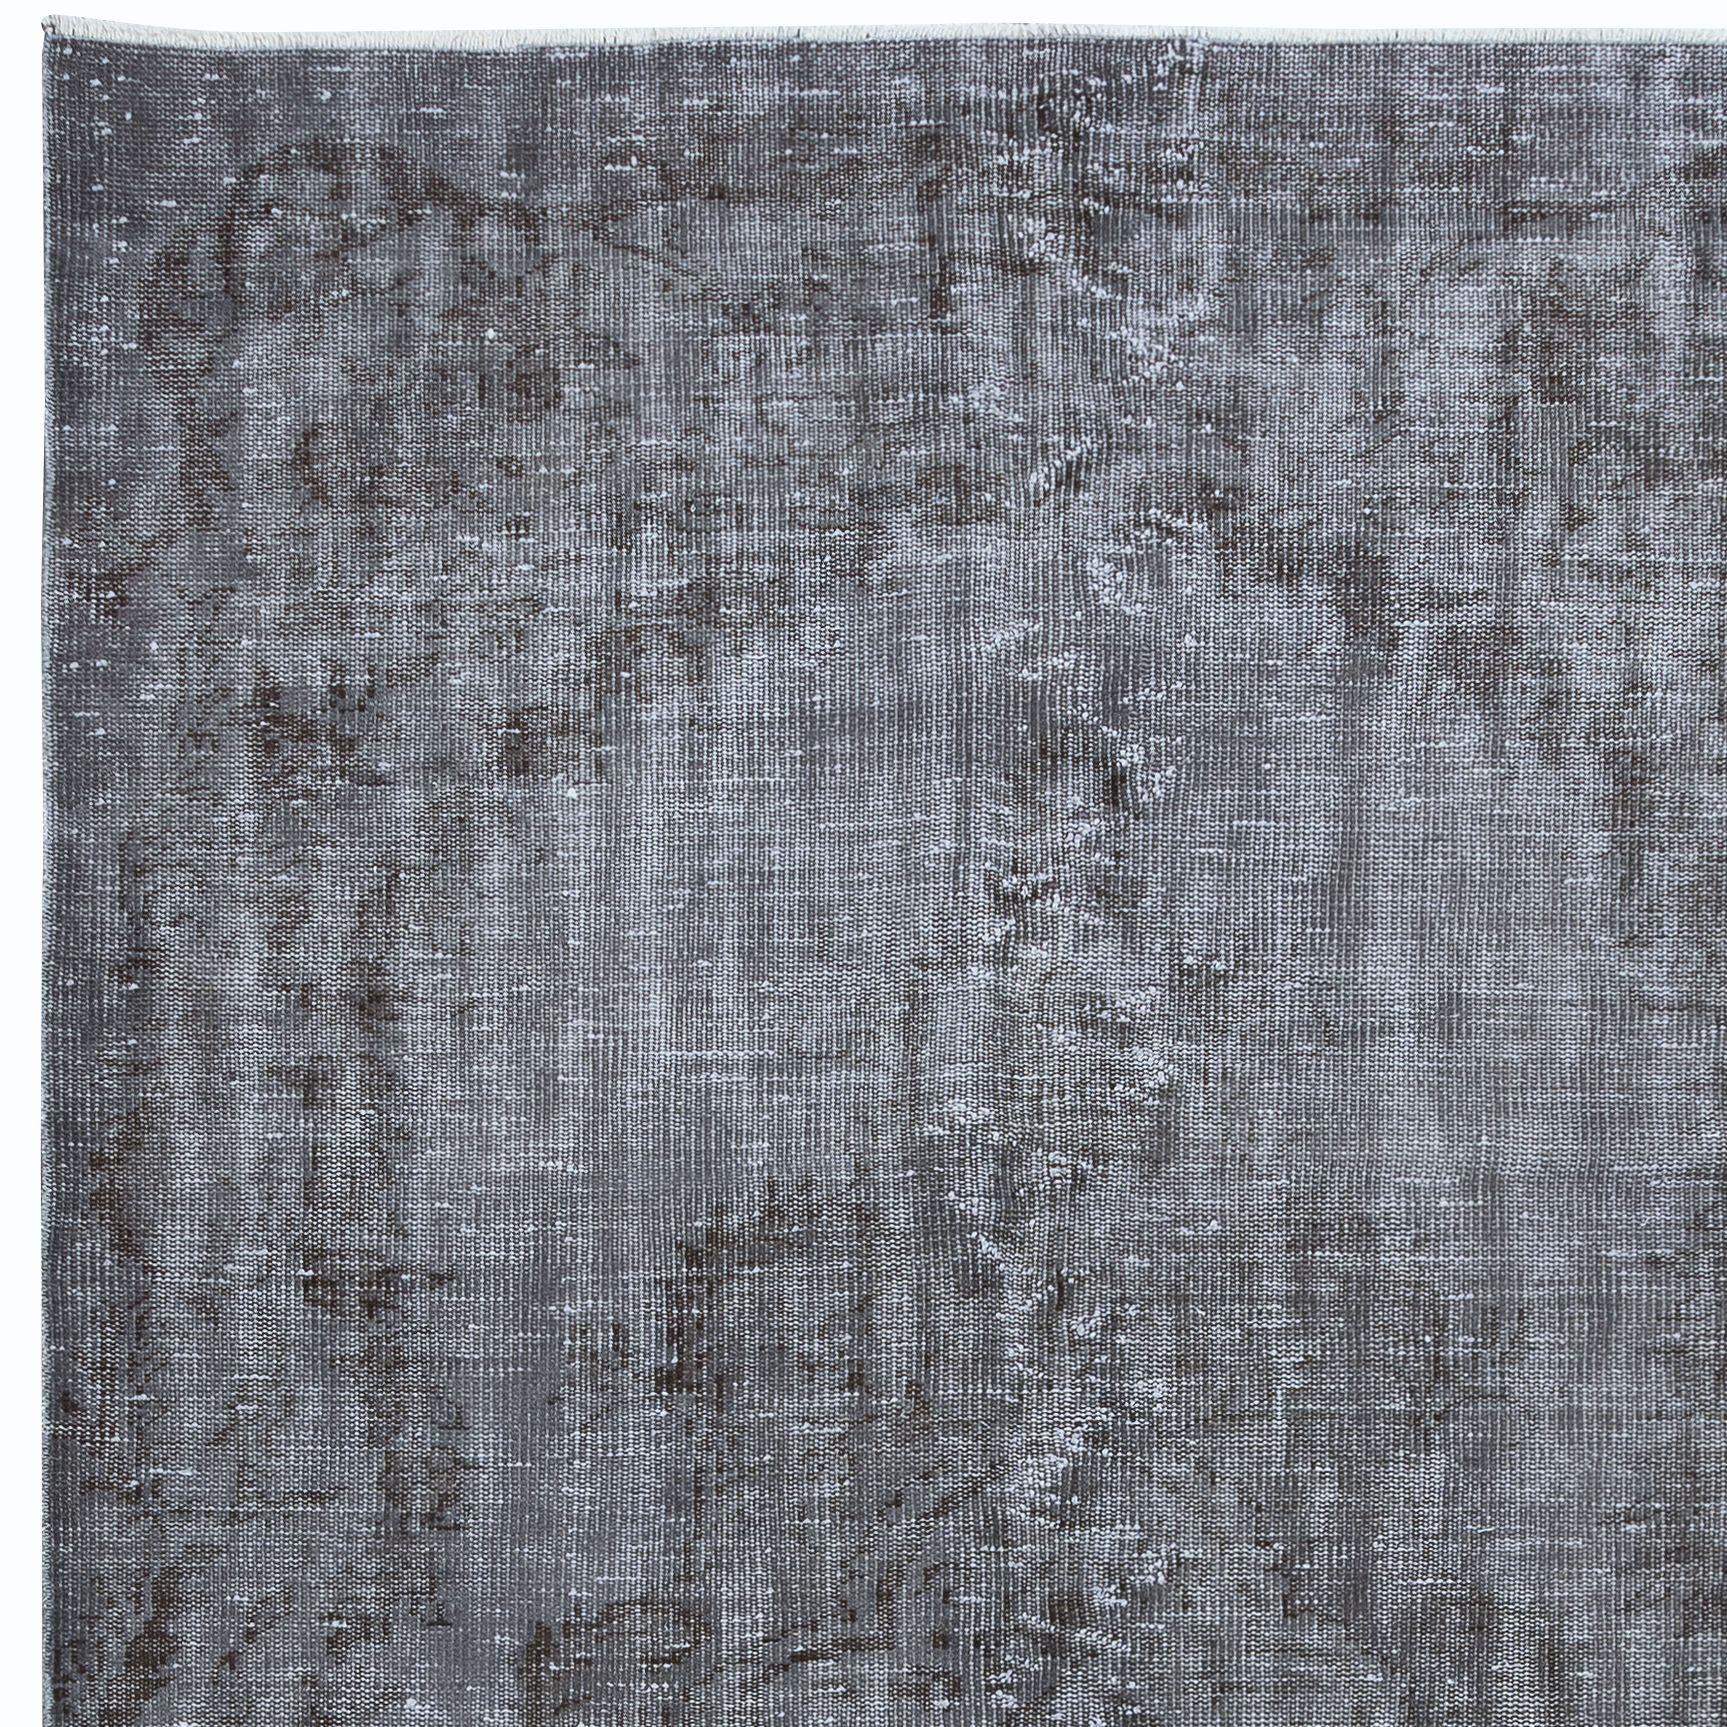 Hand-Woven 5x8.6 Ft Gray Handmade Area Rug, Decorative Turkish Carpet, Floor Covering For Sale